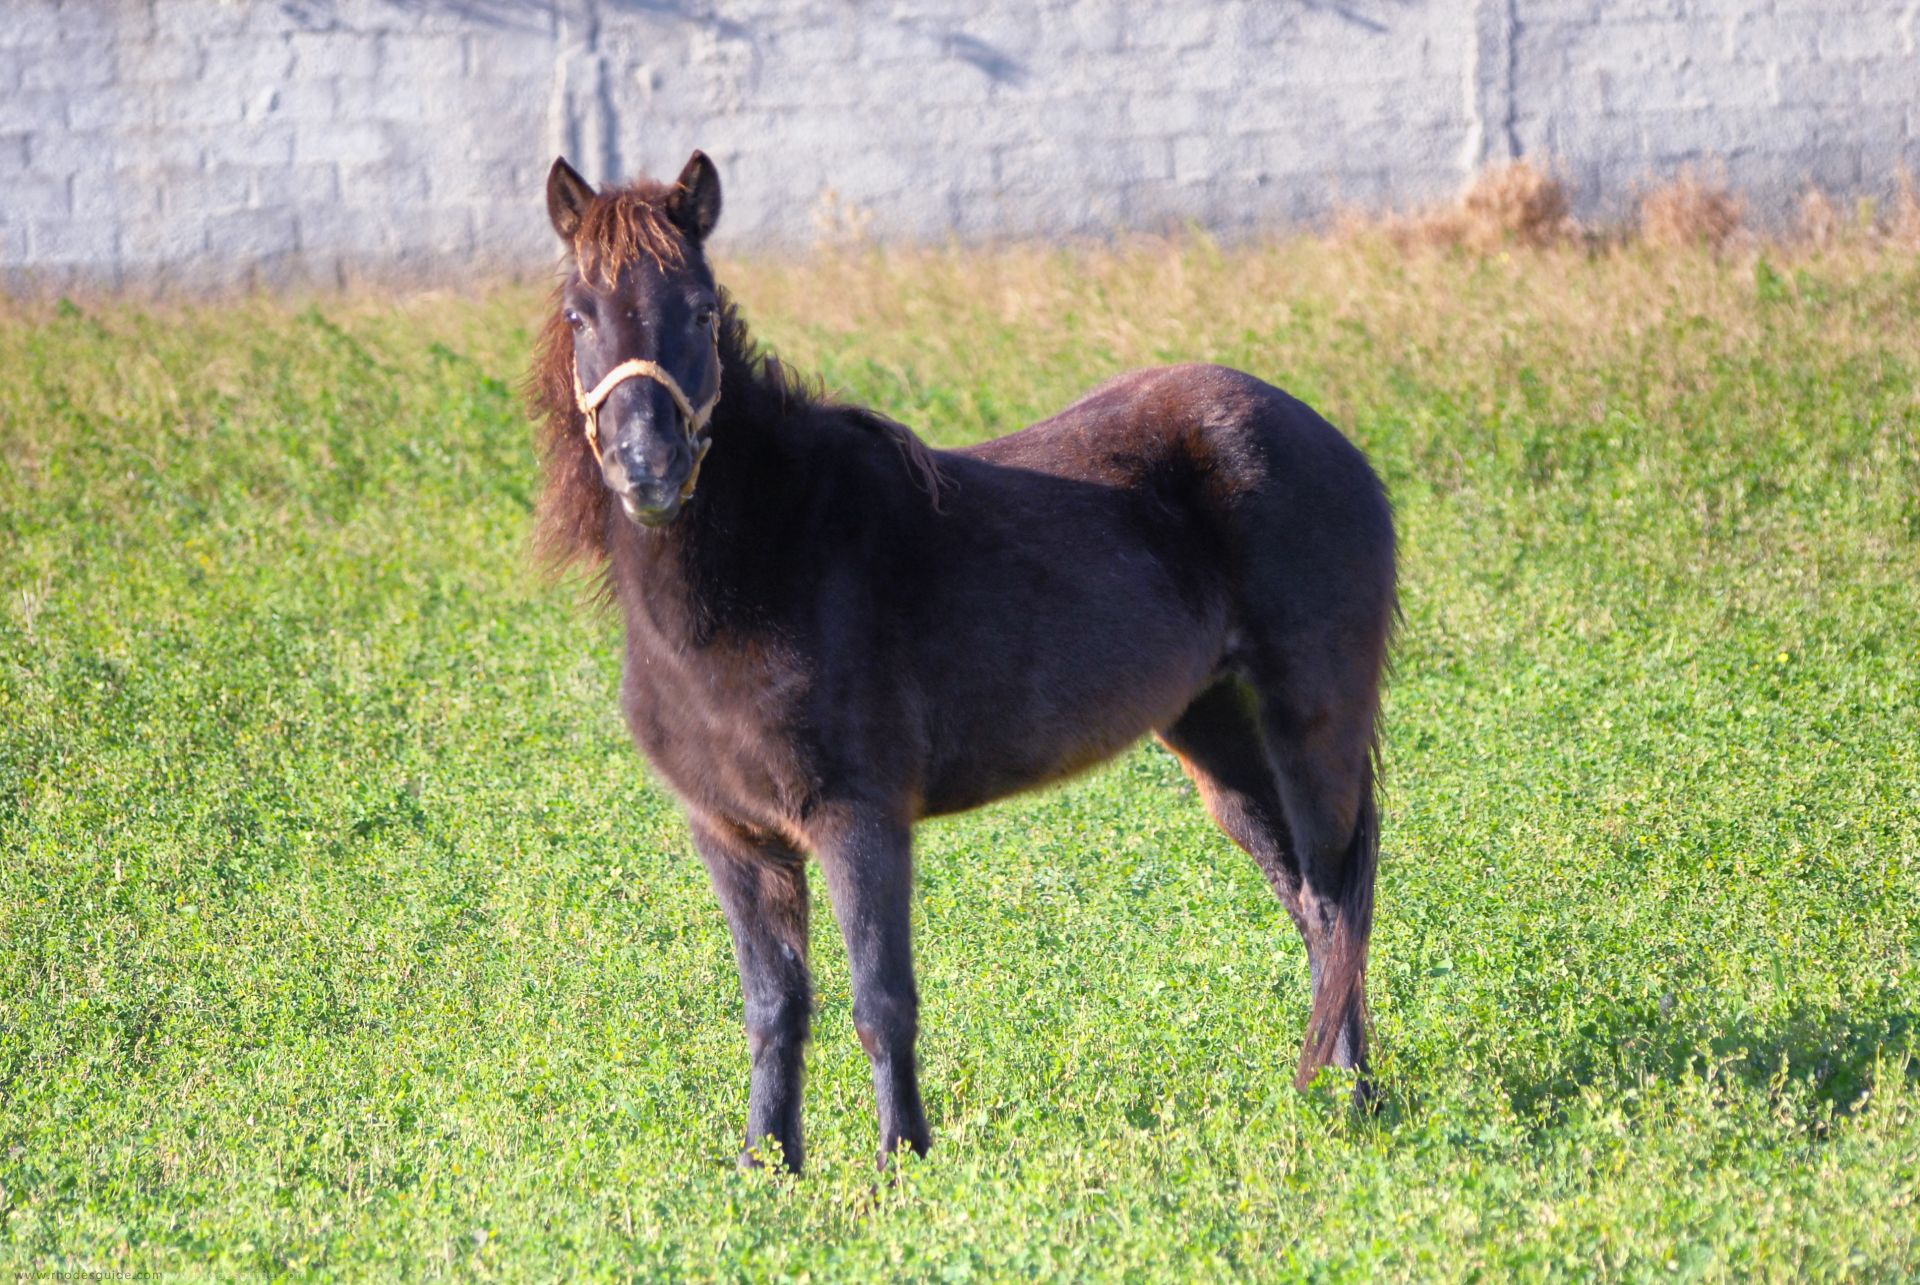 The miniature horse of Rhodes